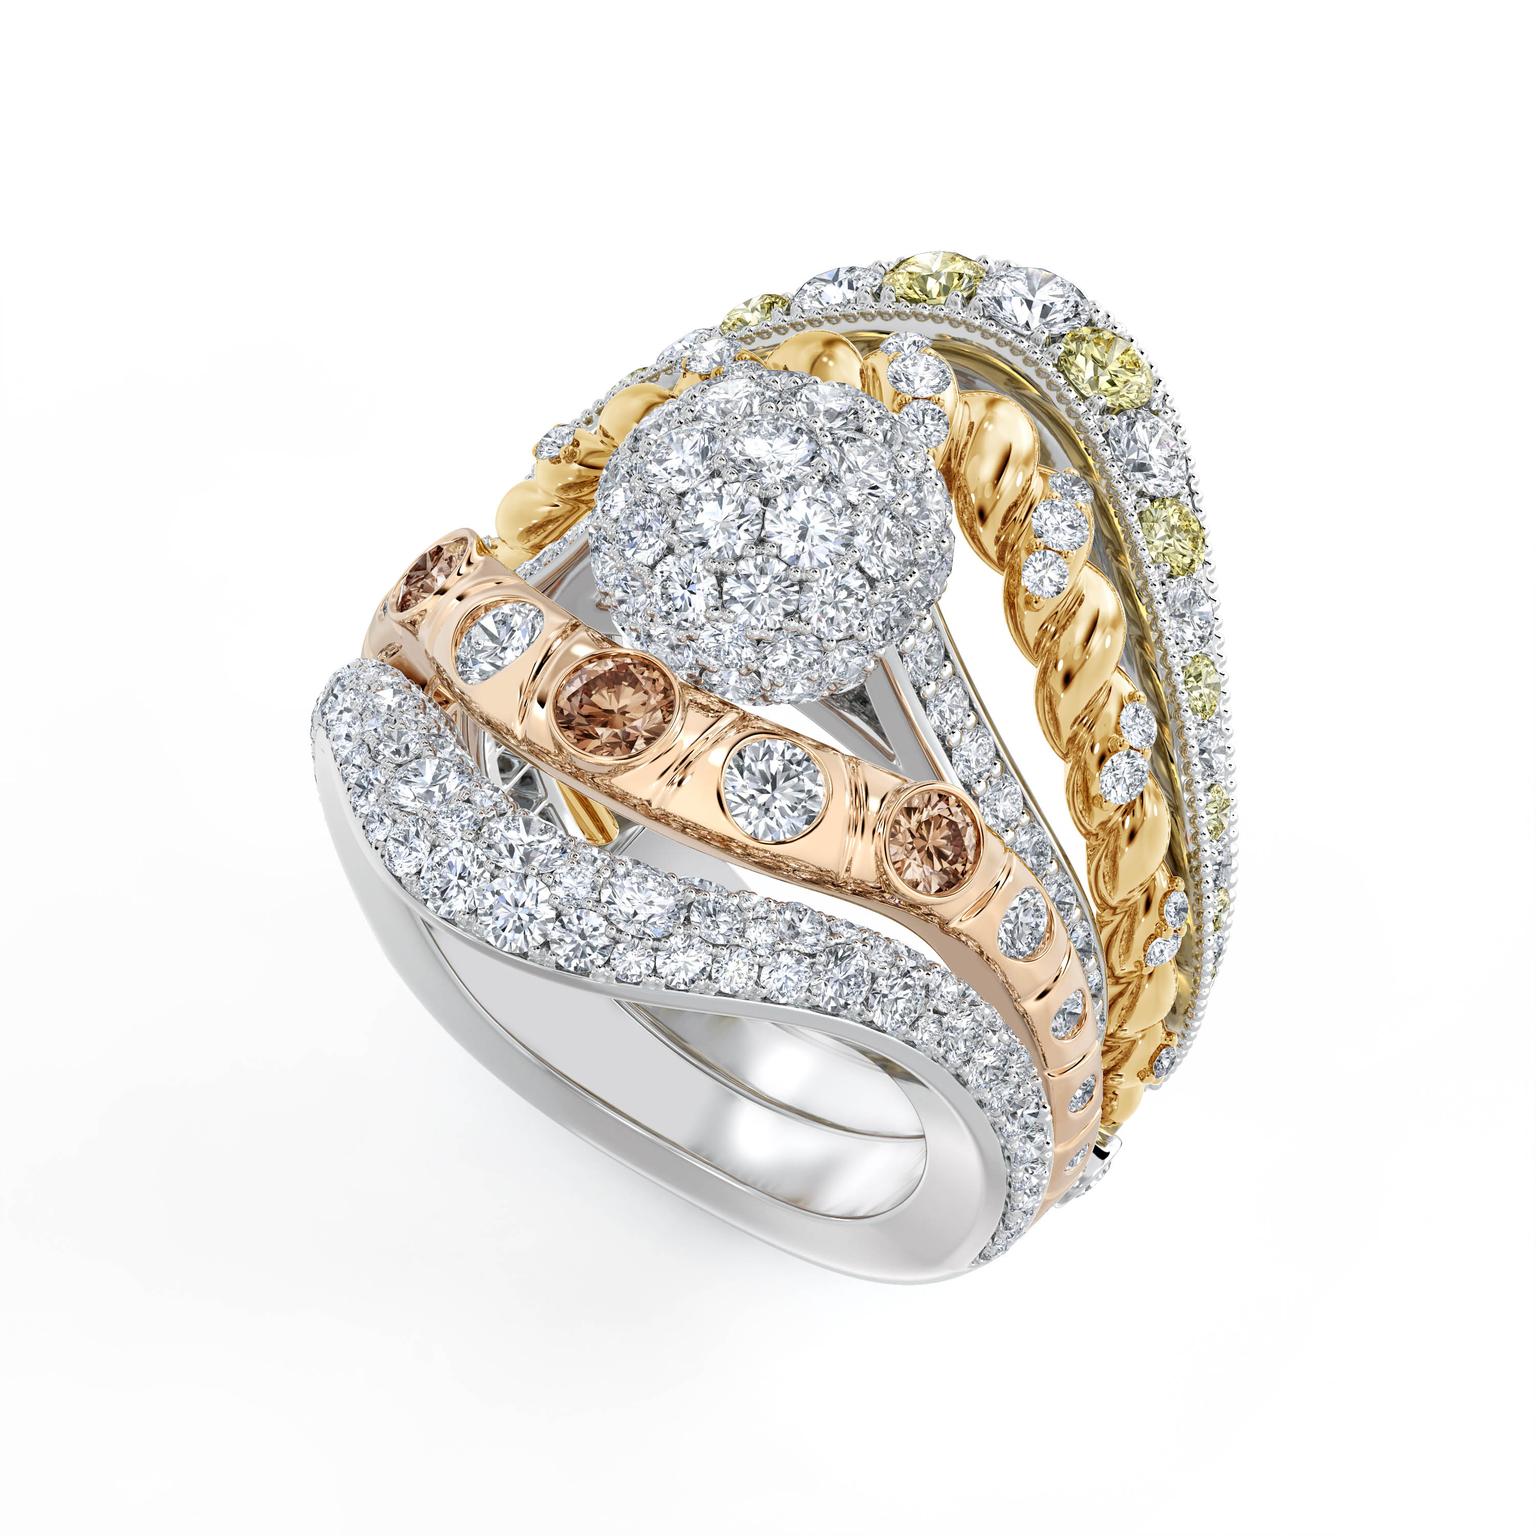 Prelude jacket ring solitaire by De Beers